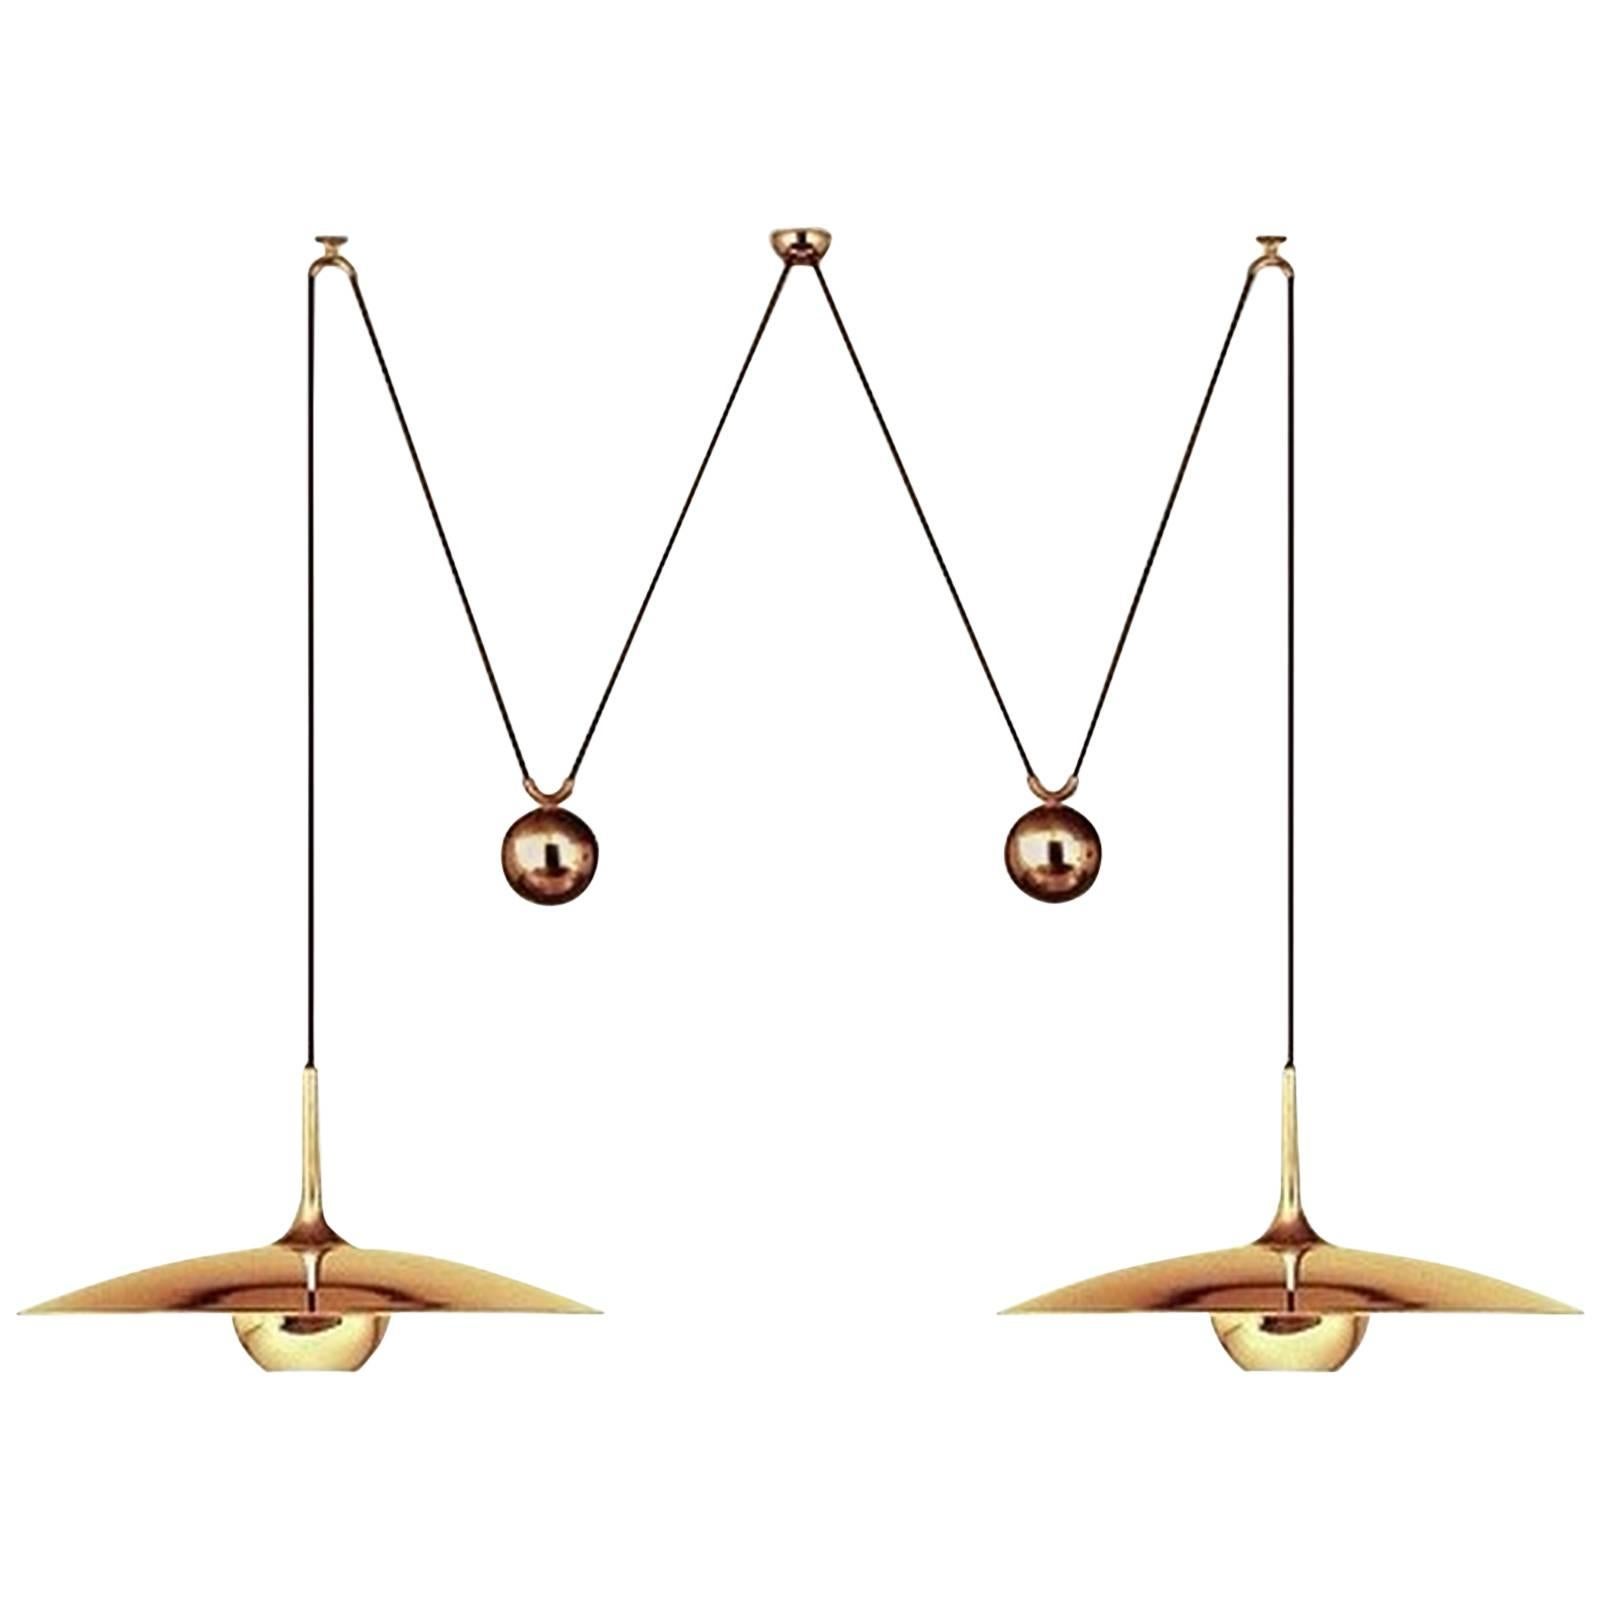 Double Pendant Light with Two Center Counterweight by Florian Schulz